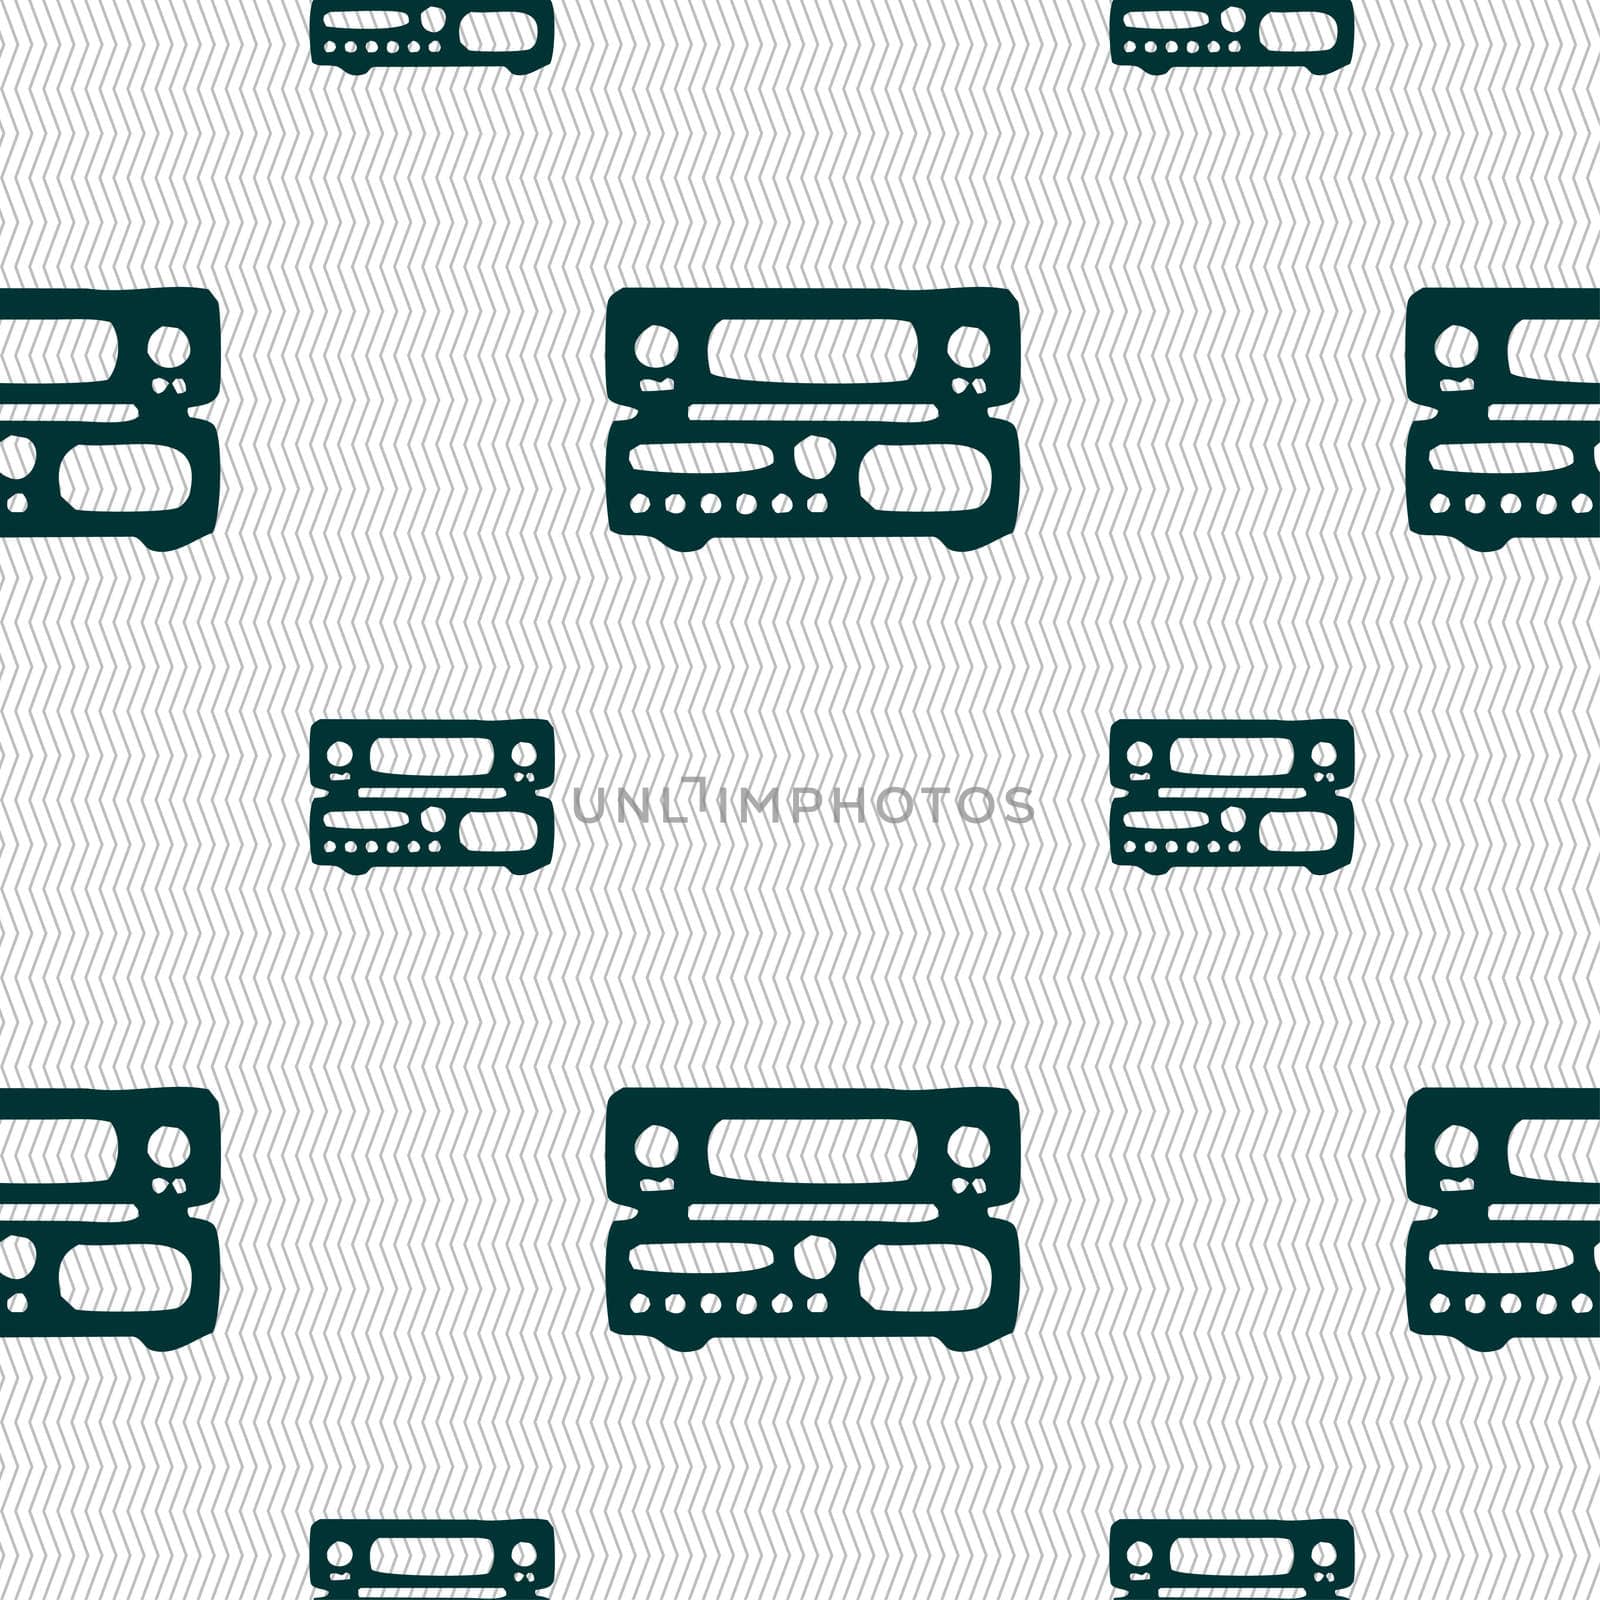 radio, receiver, amplifier icon sign. Seamless pattern with geometric texture. illustration